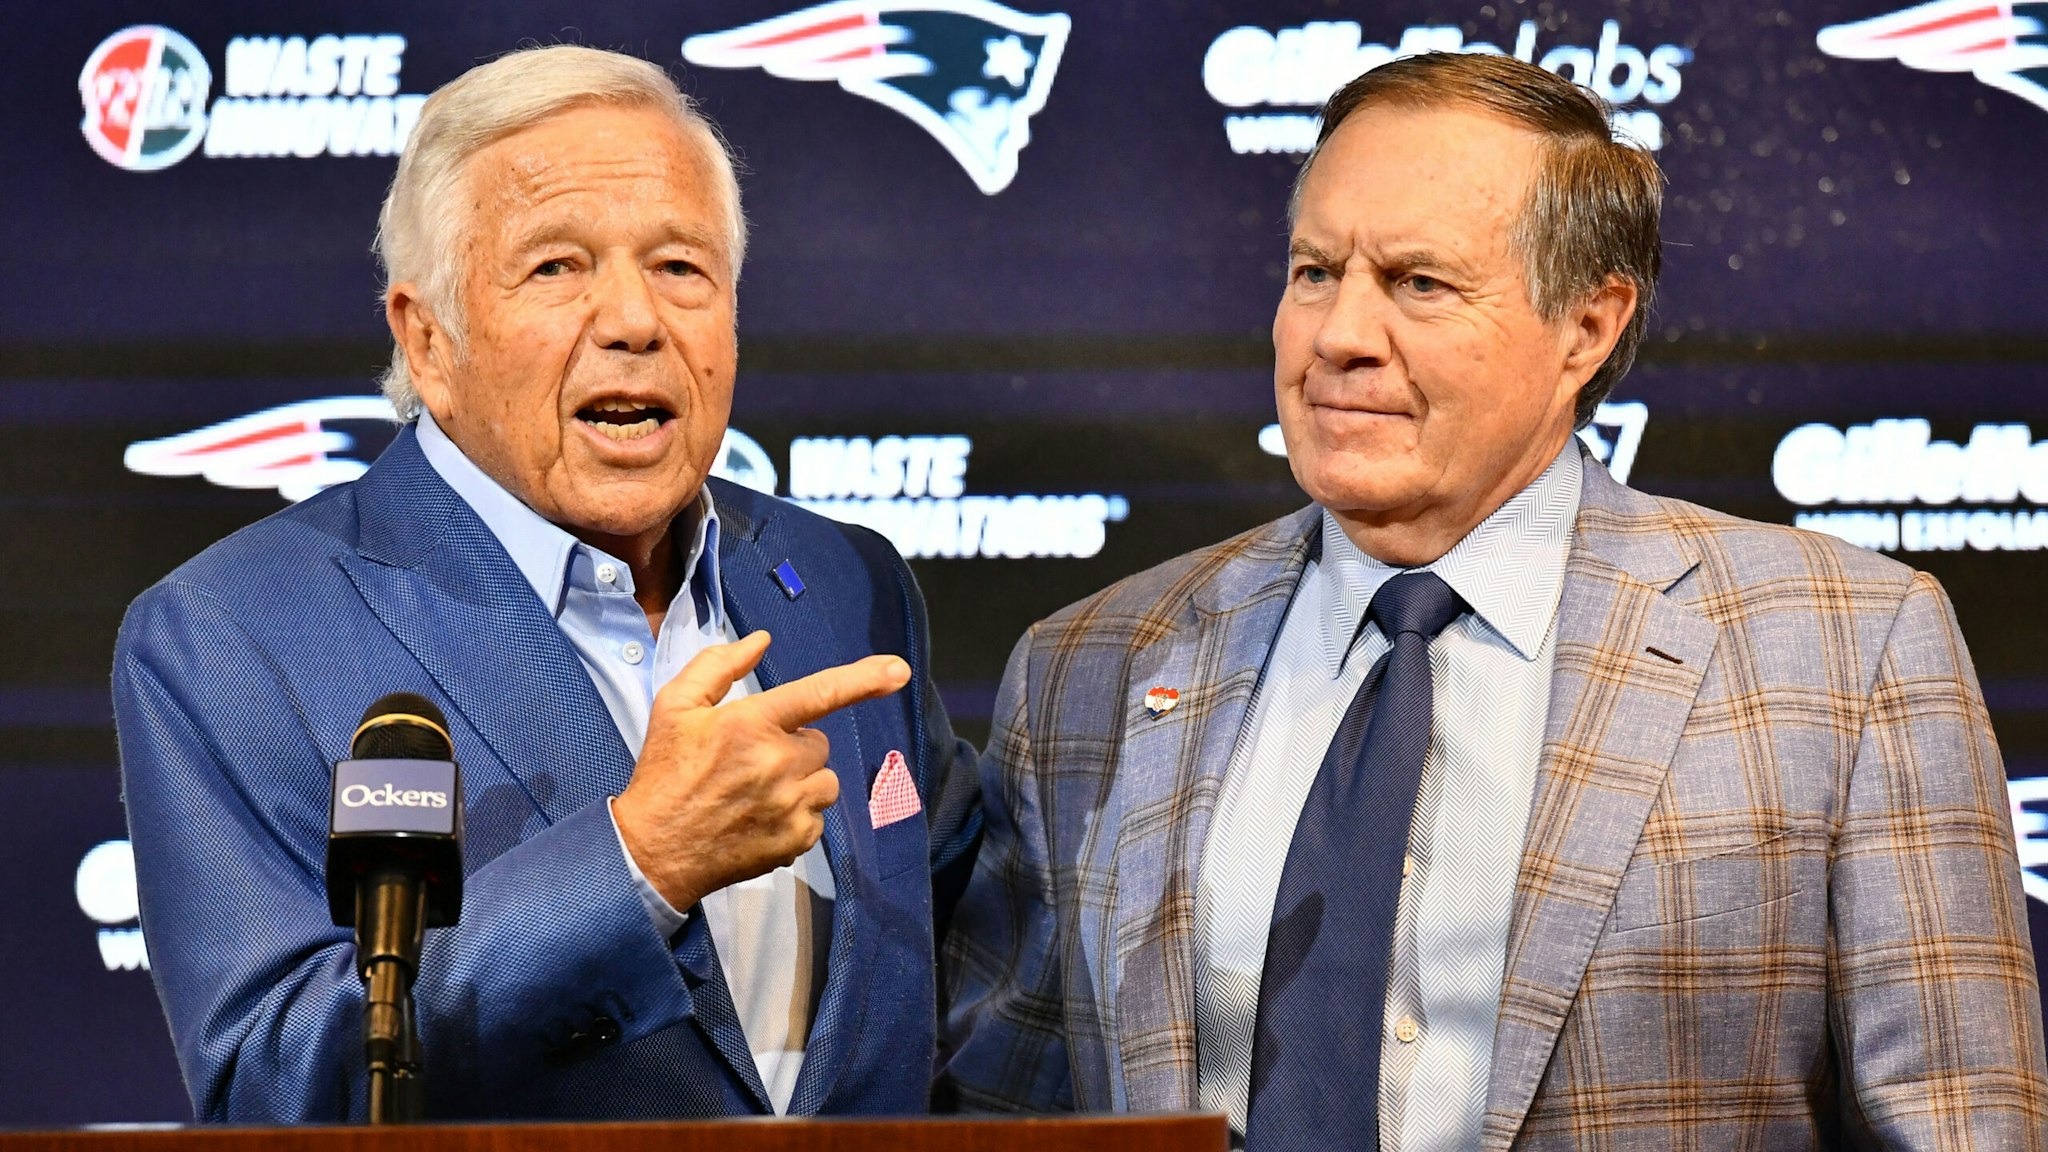 New England Patriots head coach Bill Belichick (R) and Patriots owner Robert Kraft speak to reporters where Belichick announced he is leaving the team during a press conference at Gillette Stadium in Foxborough, Massachusetts, on January 11, 2024. Belichick, the NFL mastermind who has guided the New England Patriots to a record six Super Bowl titles as head coach, is parting ways with the team after 24 seasons.